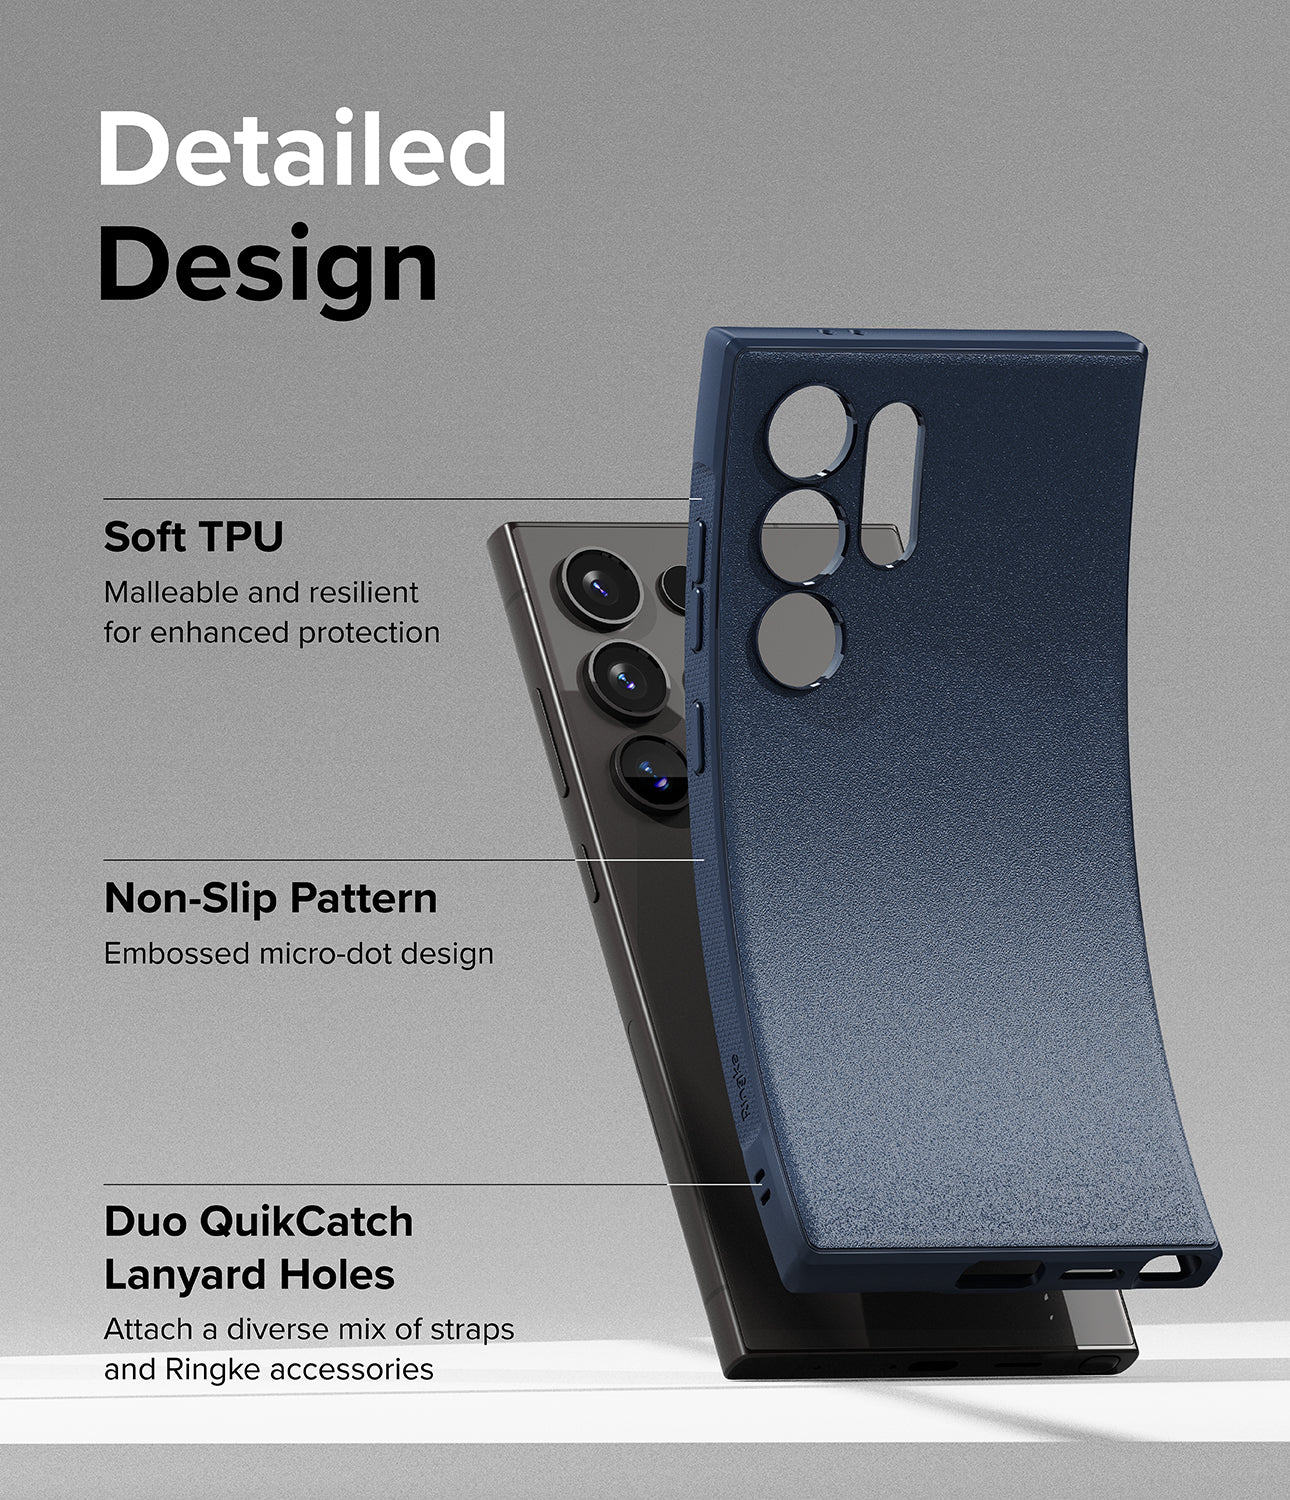 Galaxy S24 Ultra Case | Onyx - NavyGalaxy S24 Ultra Case | Onyx - Navy - Detailed Design. Malleable and resilient for enhanced protection with Soft TPU. Embossed micro-dot design with Non-Slip Pattern. Attach a diverse mix of straps and Ringke accessories with Duo QuikCatch Lanyard Holes.